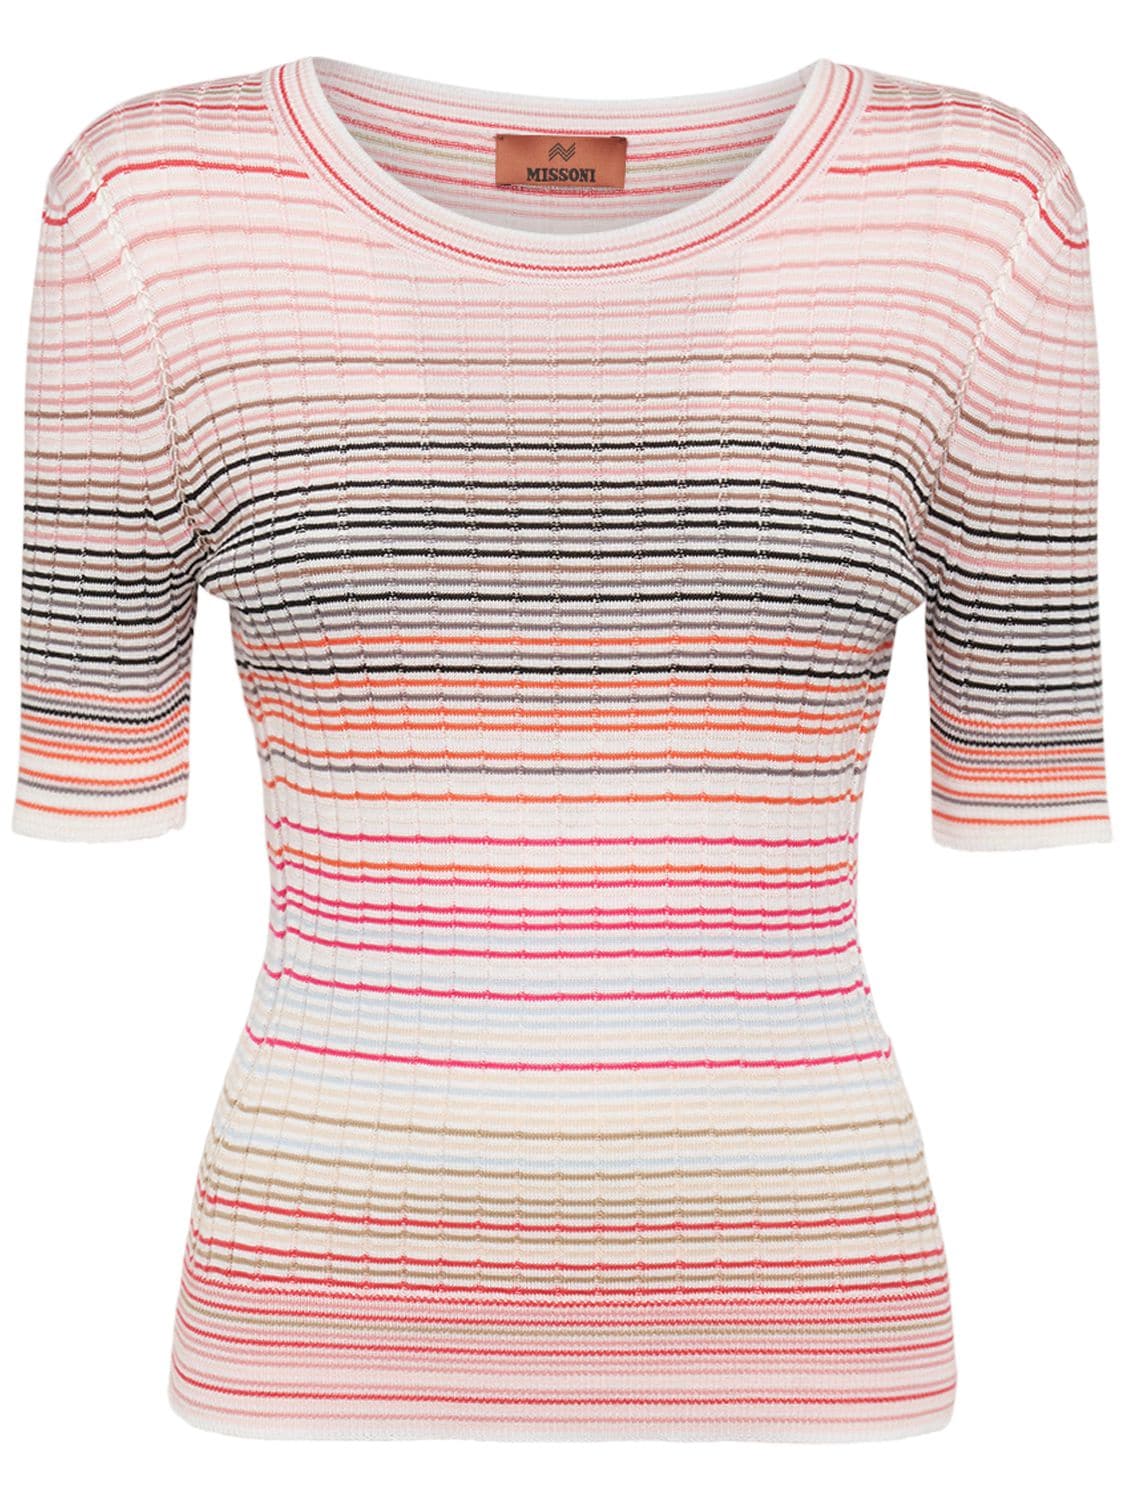 Image of Striped Knit Cotton Blend Top